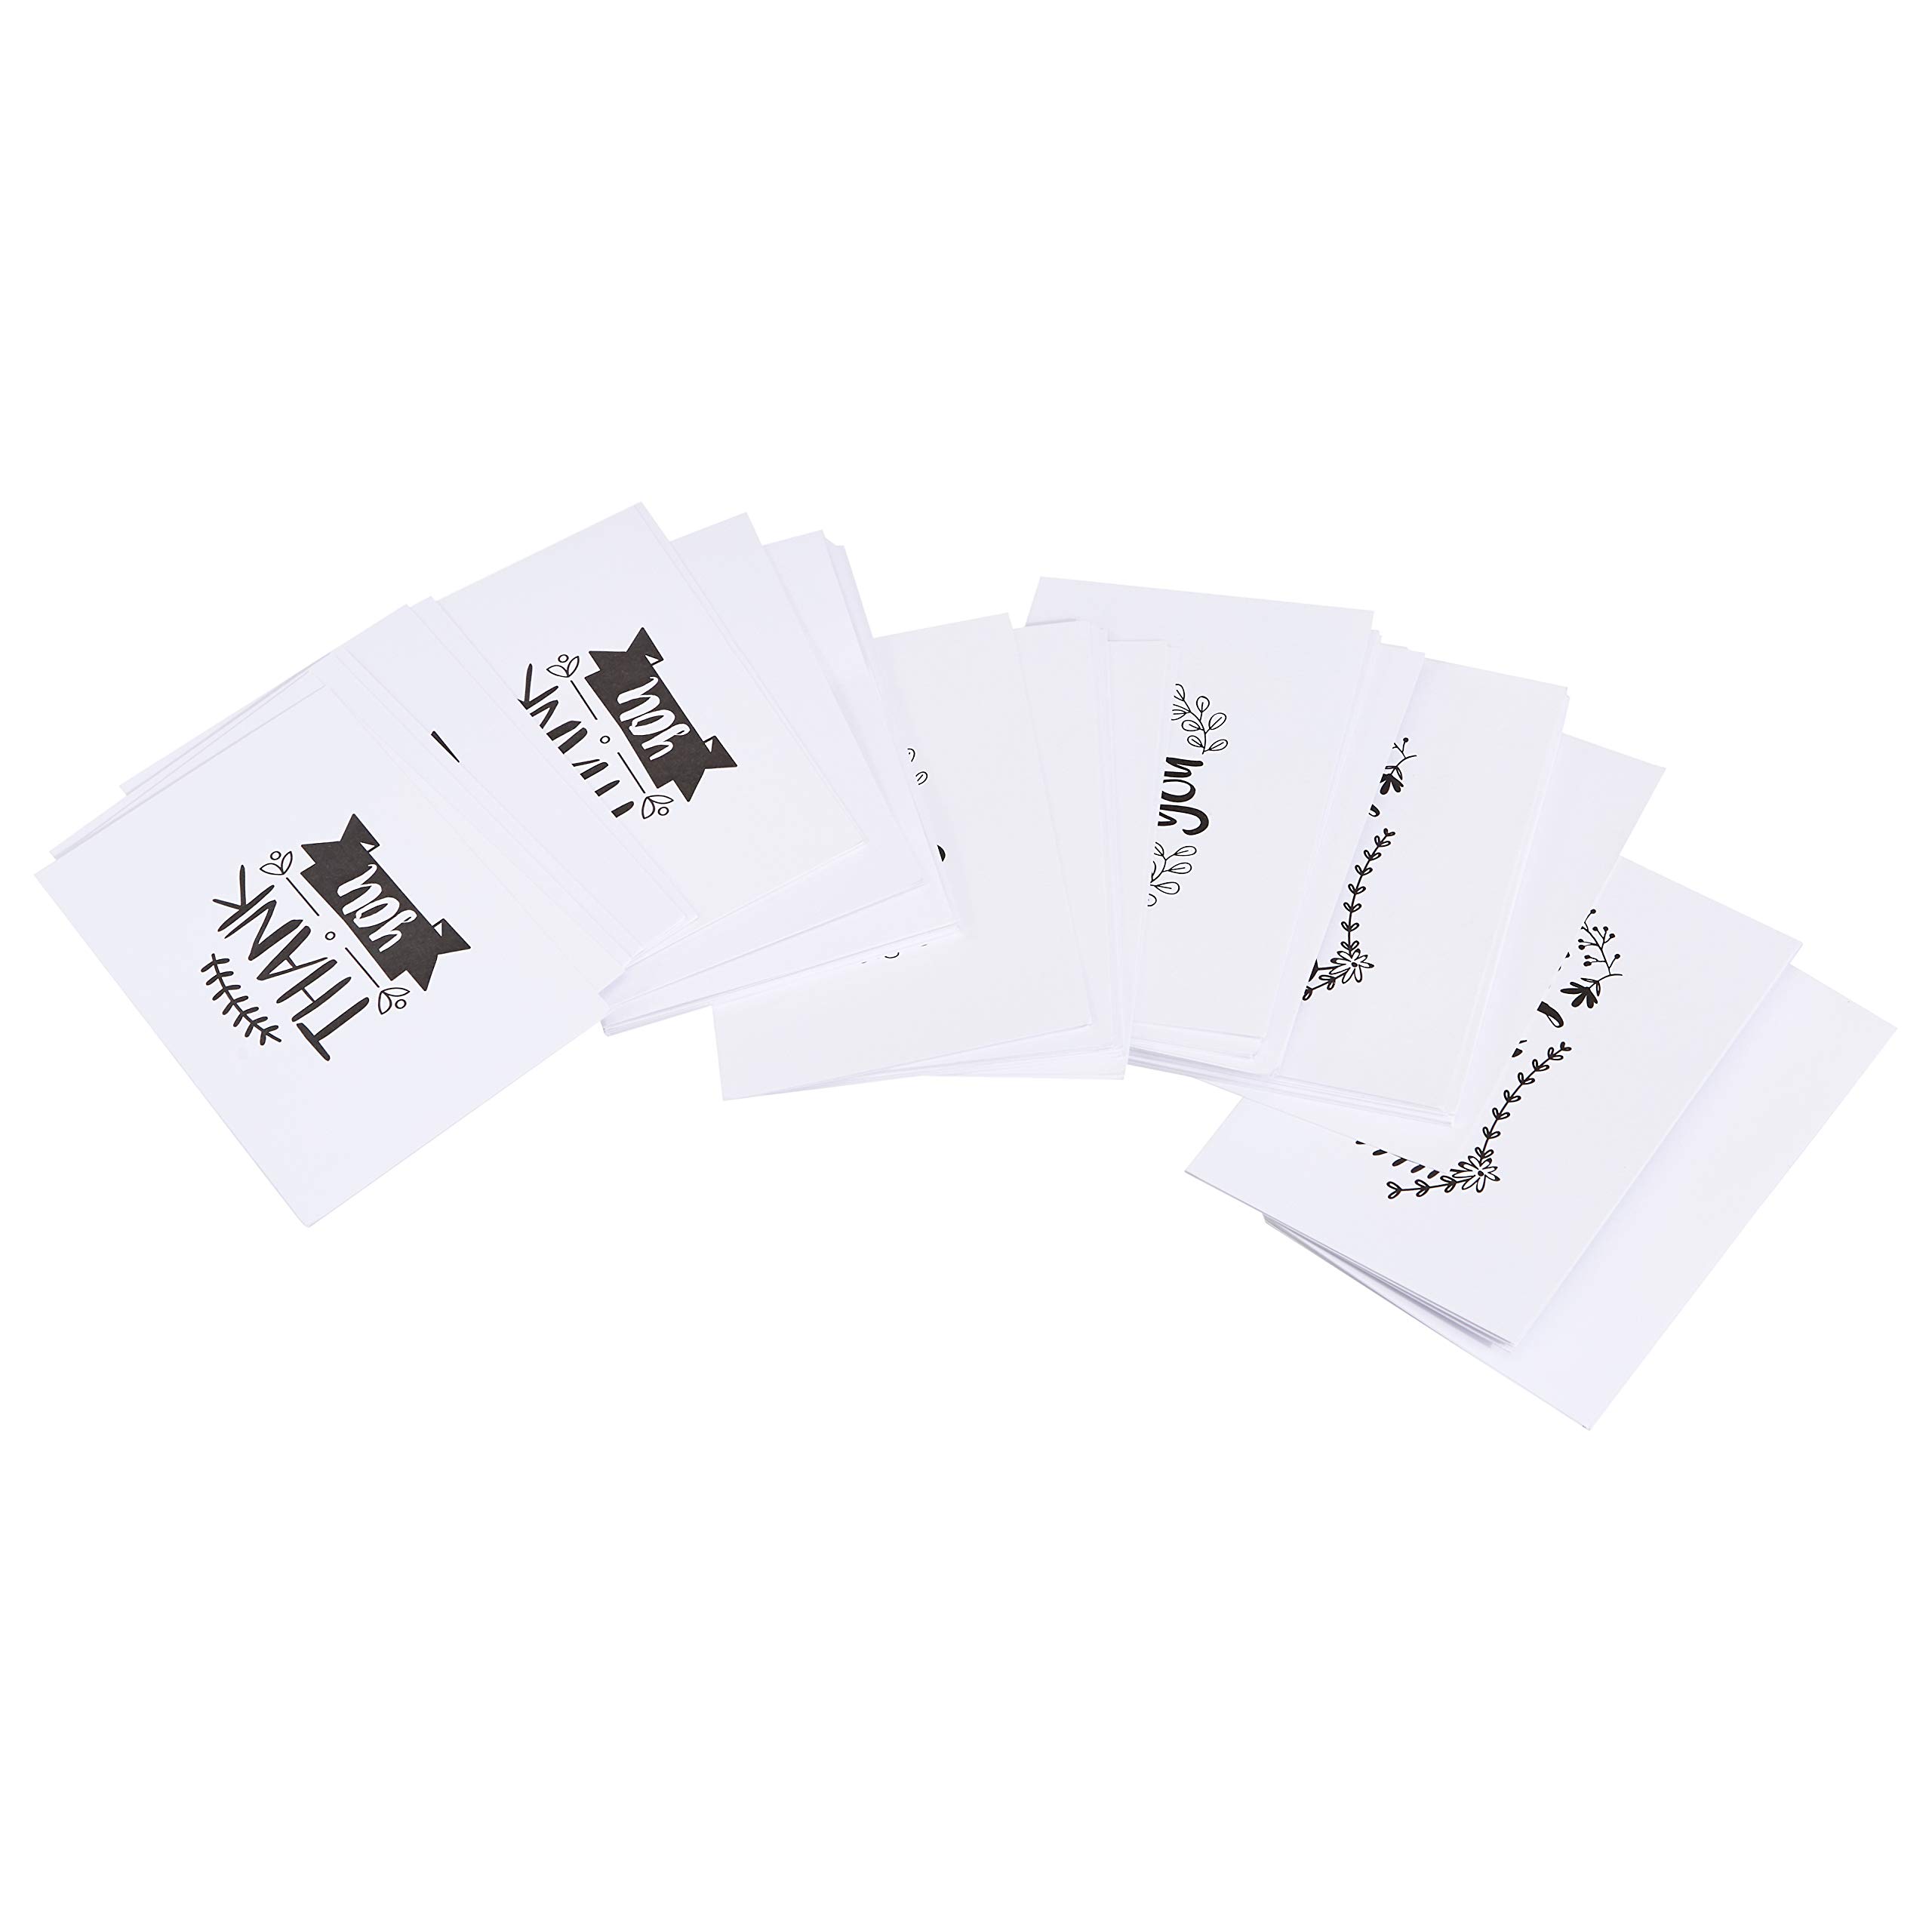 Amazon Basics Thank You Cards and Envelopes, 48 Count, Black and White